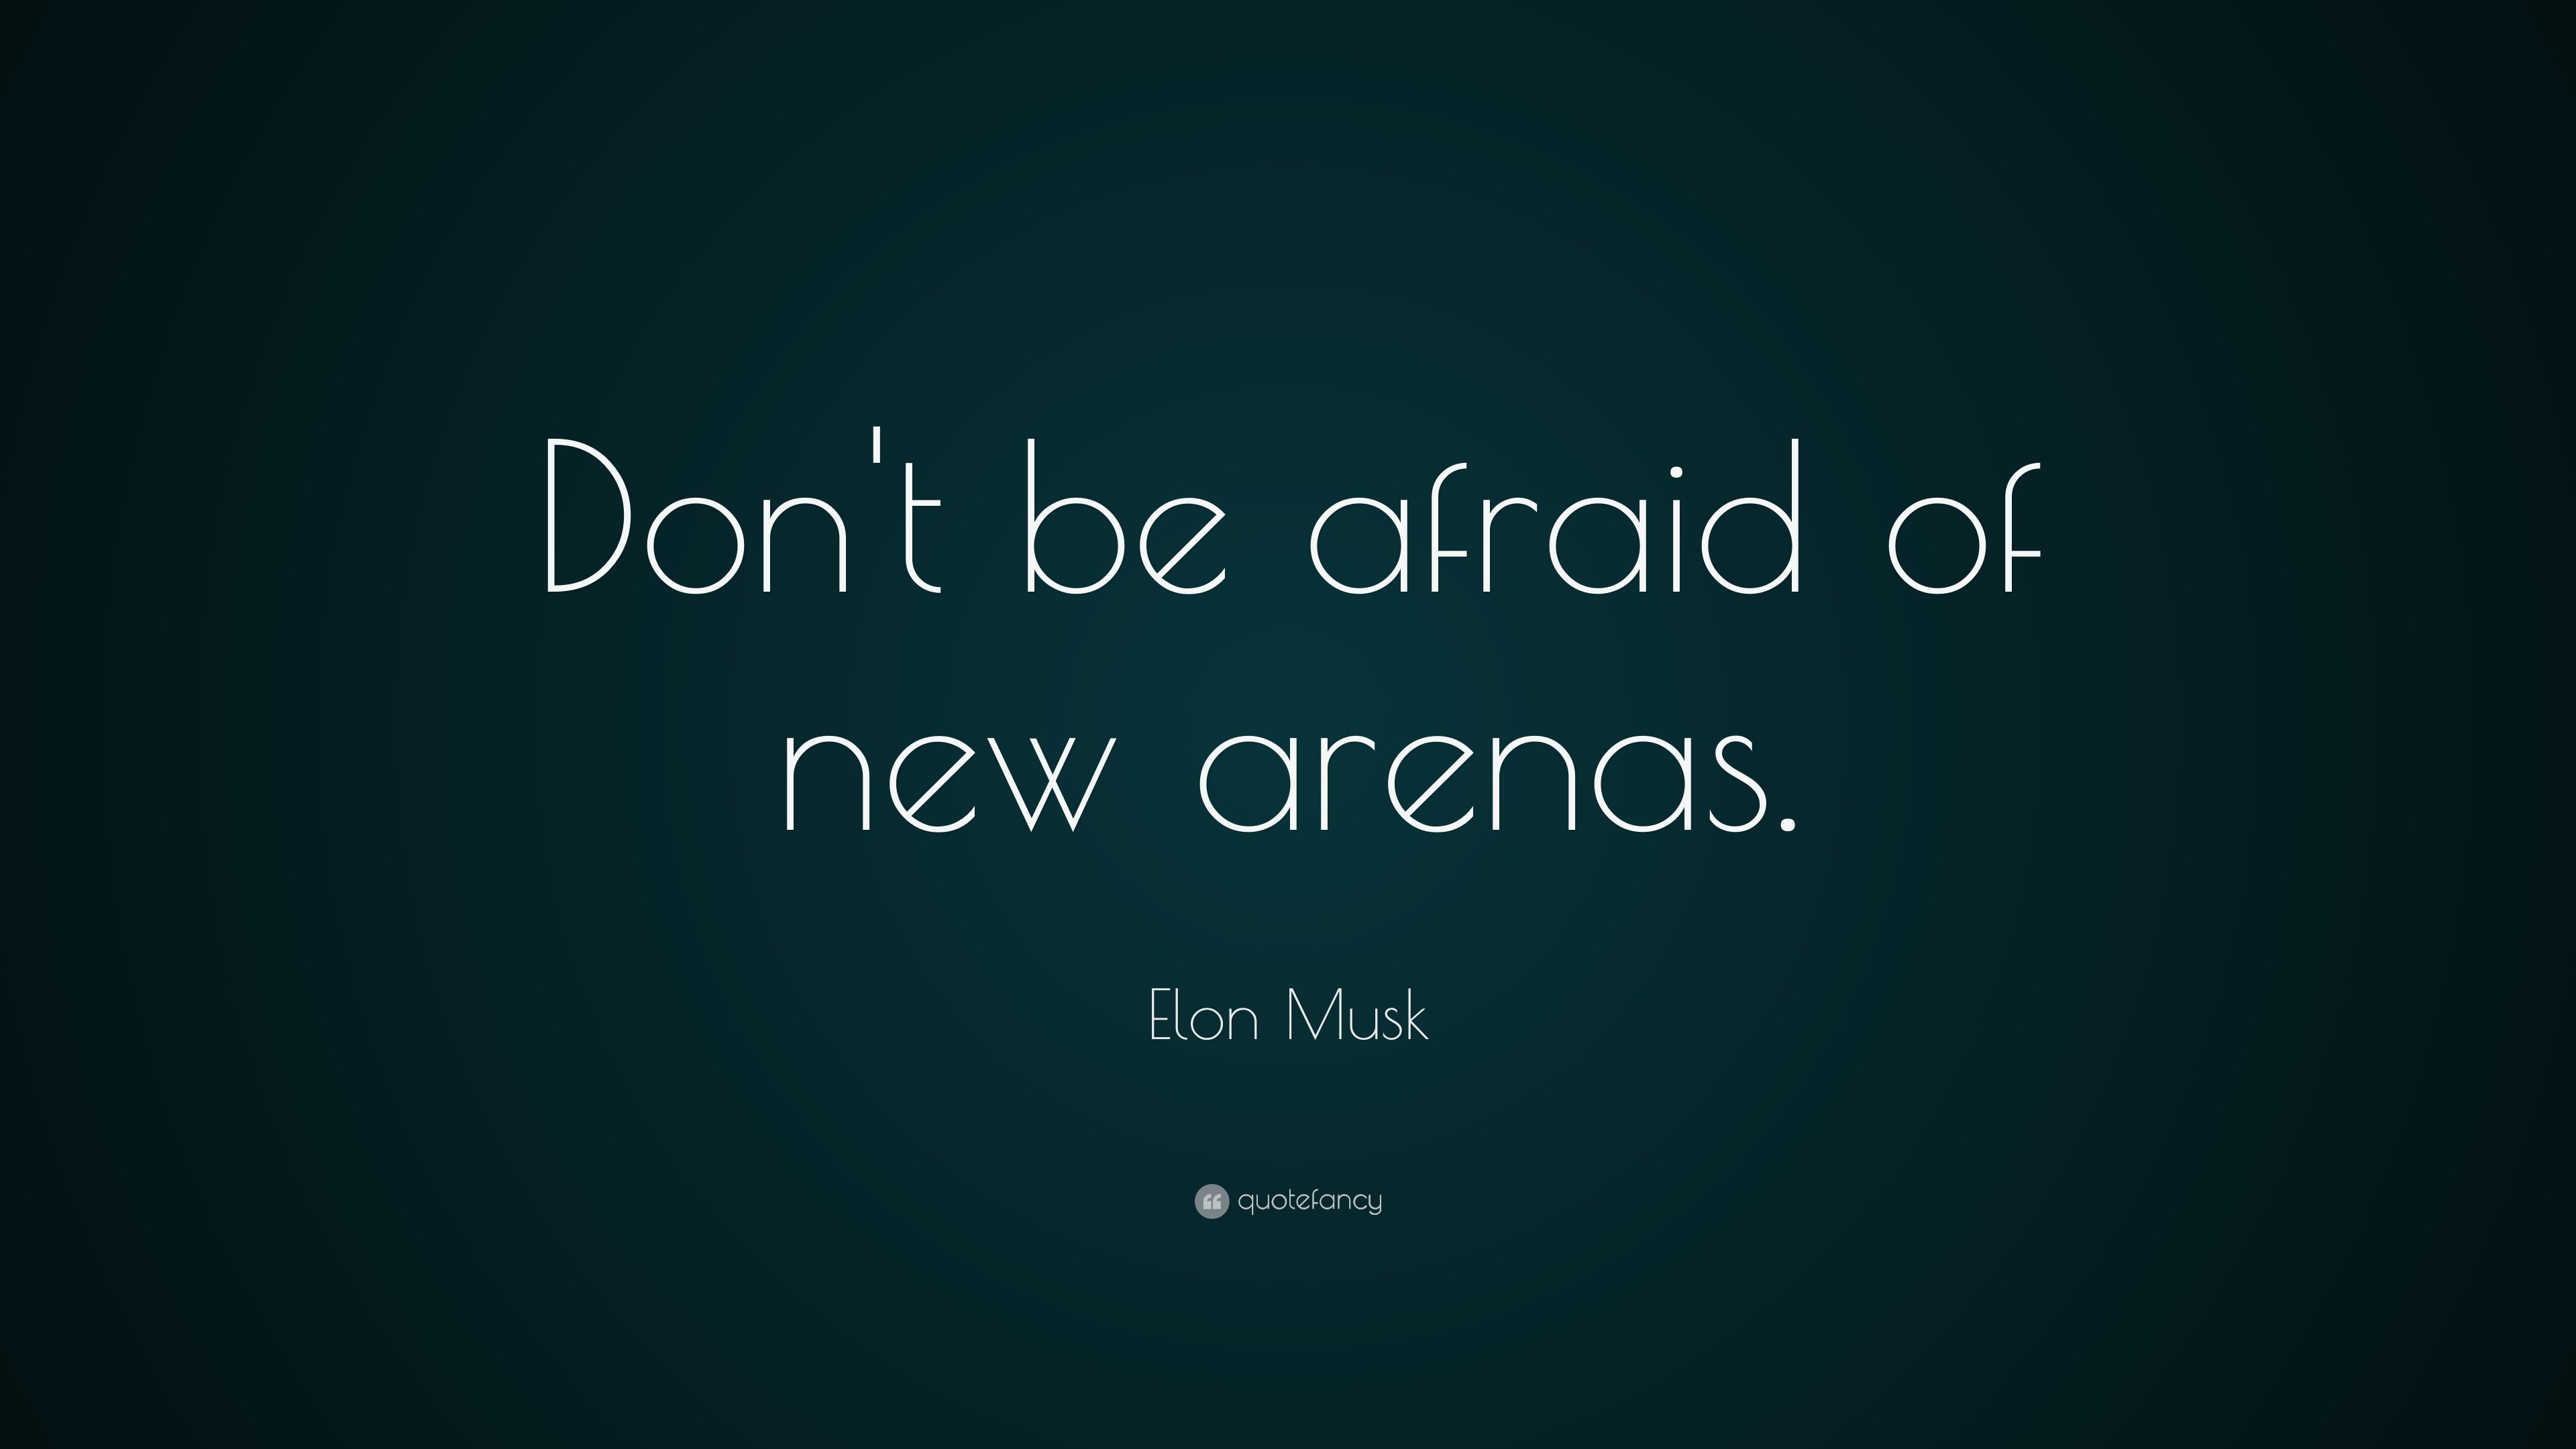 Elon Musk Quote Dont be afraid of new arenas.